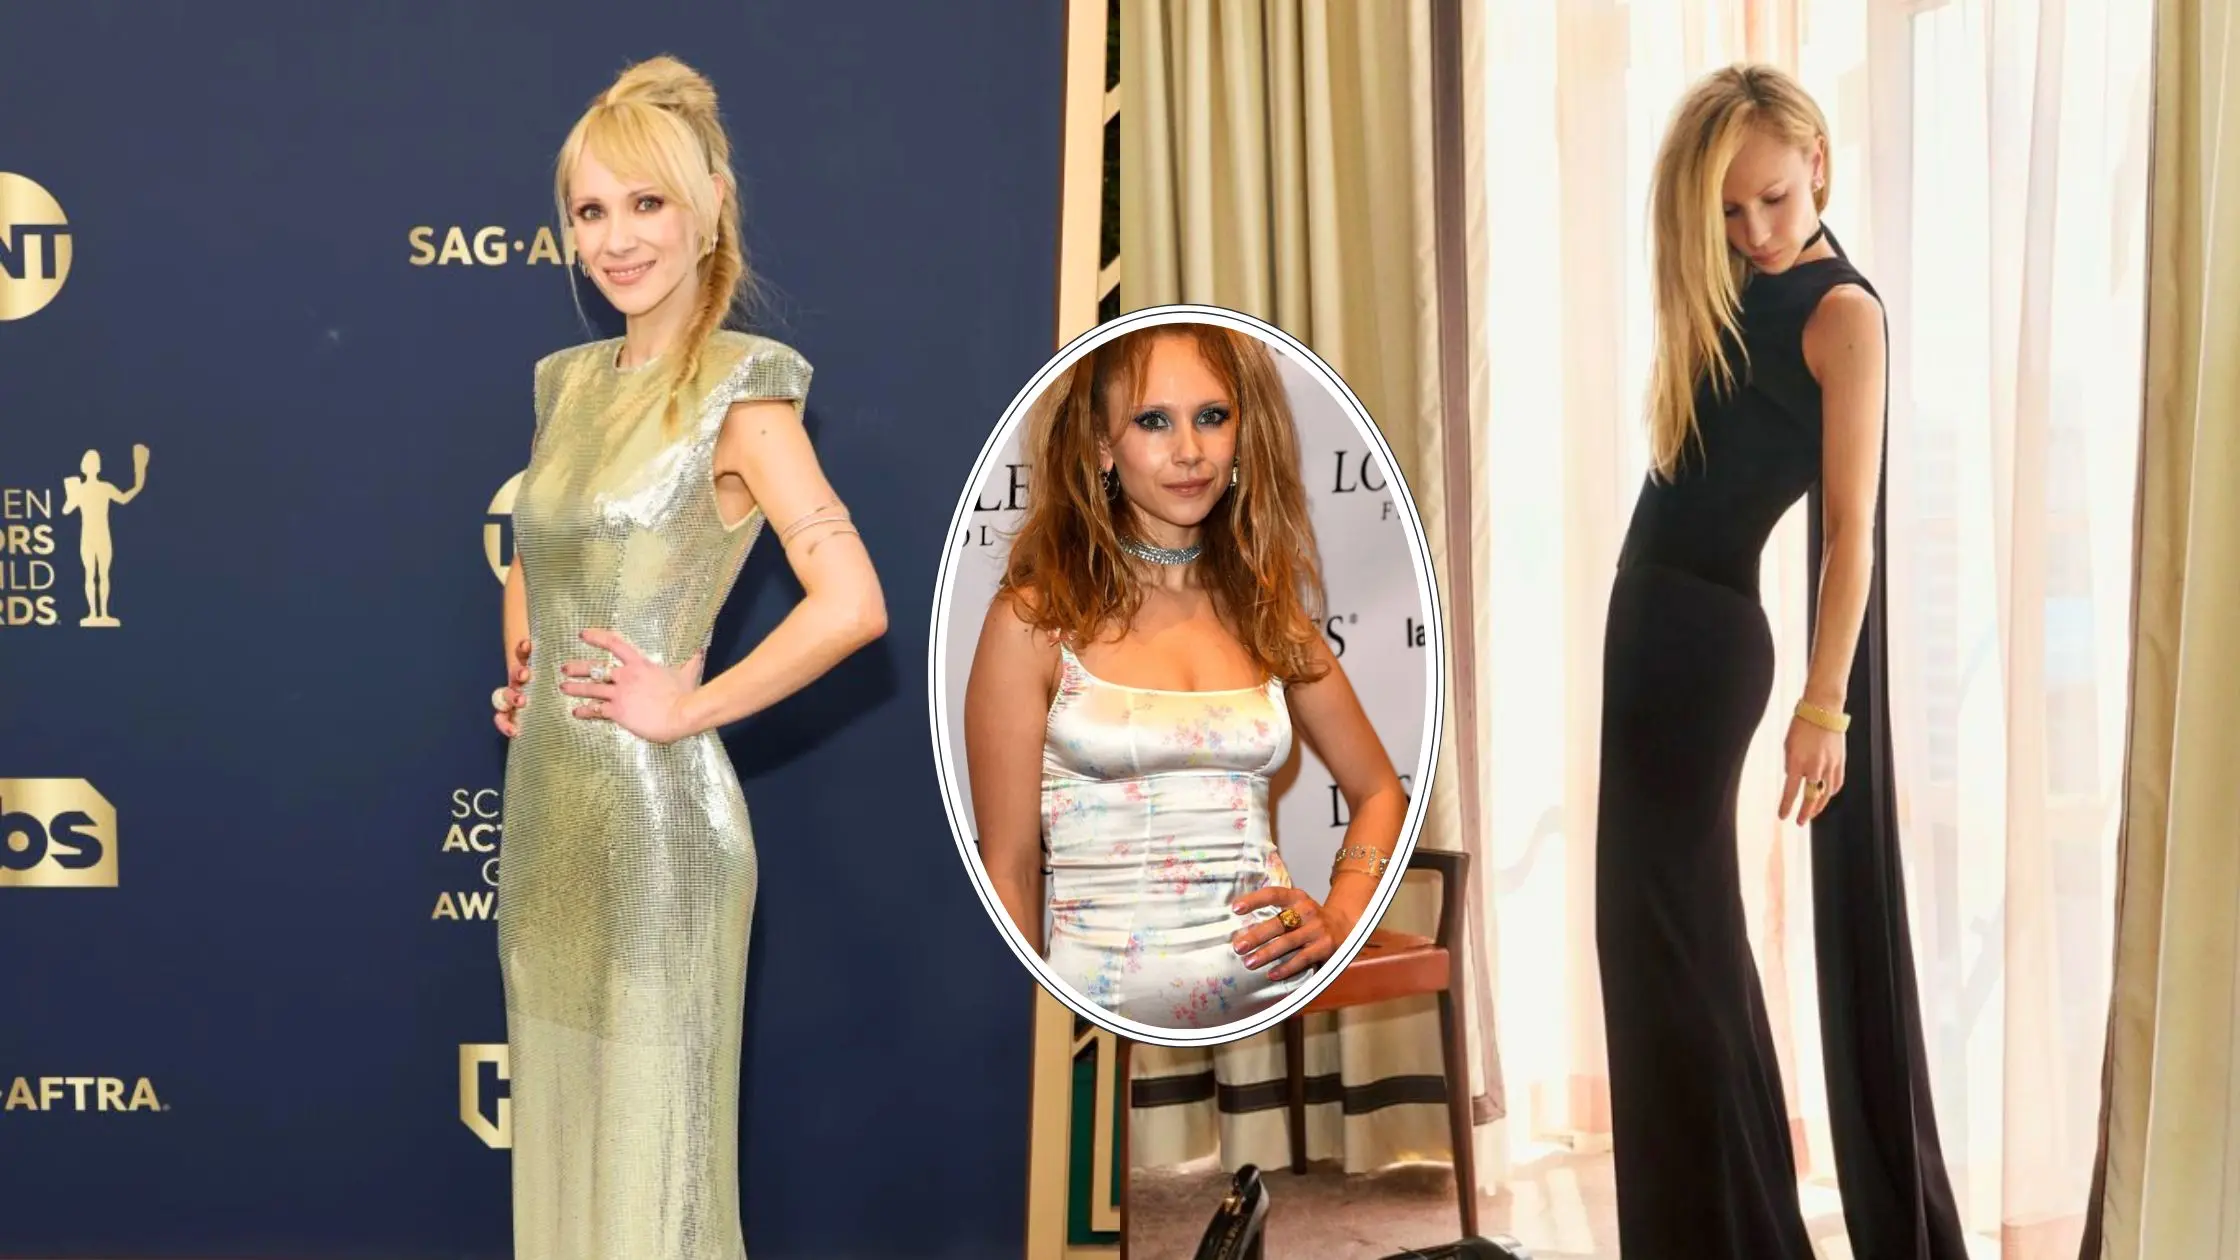 Juno Temple Weight Loss